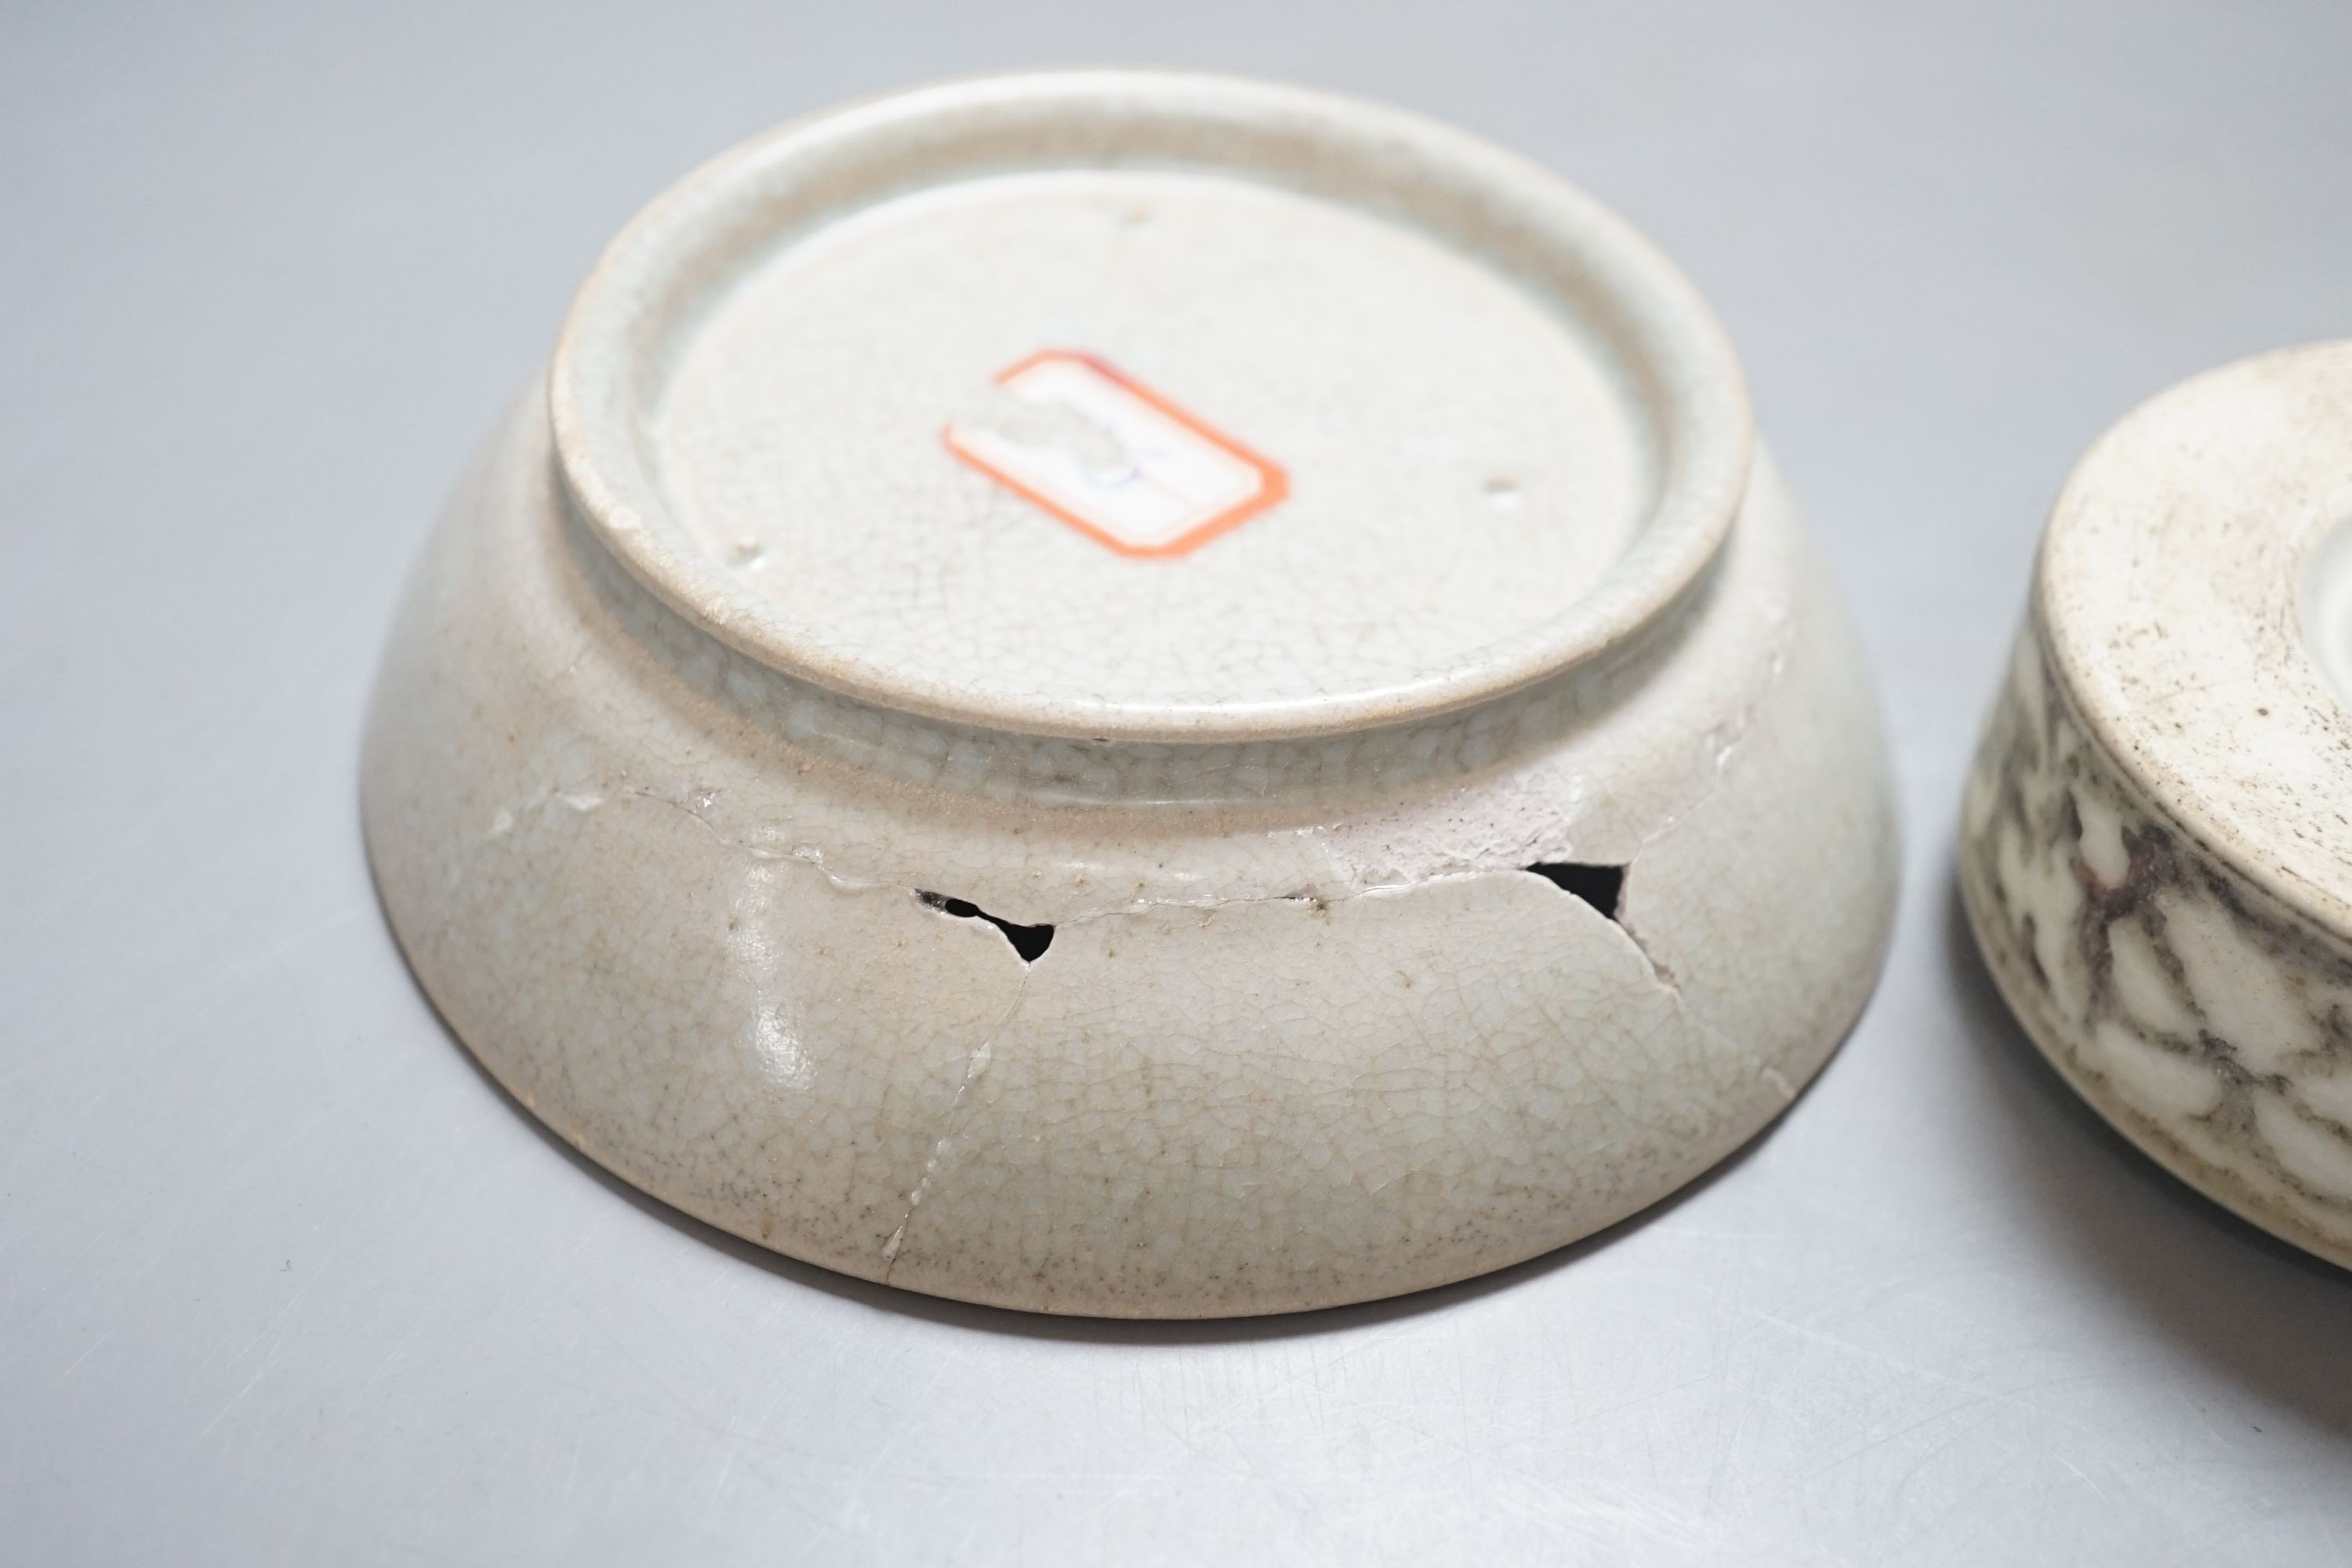 A Chinese porcelain paperweight and a saucer dish, 14 cm diameter